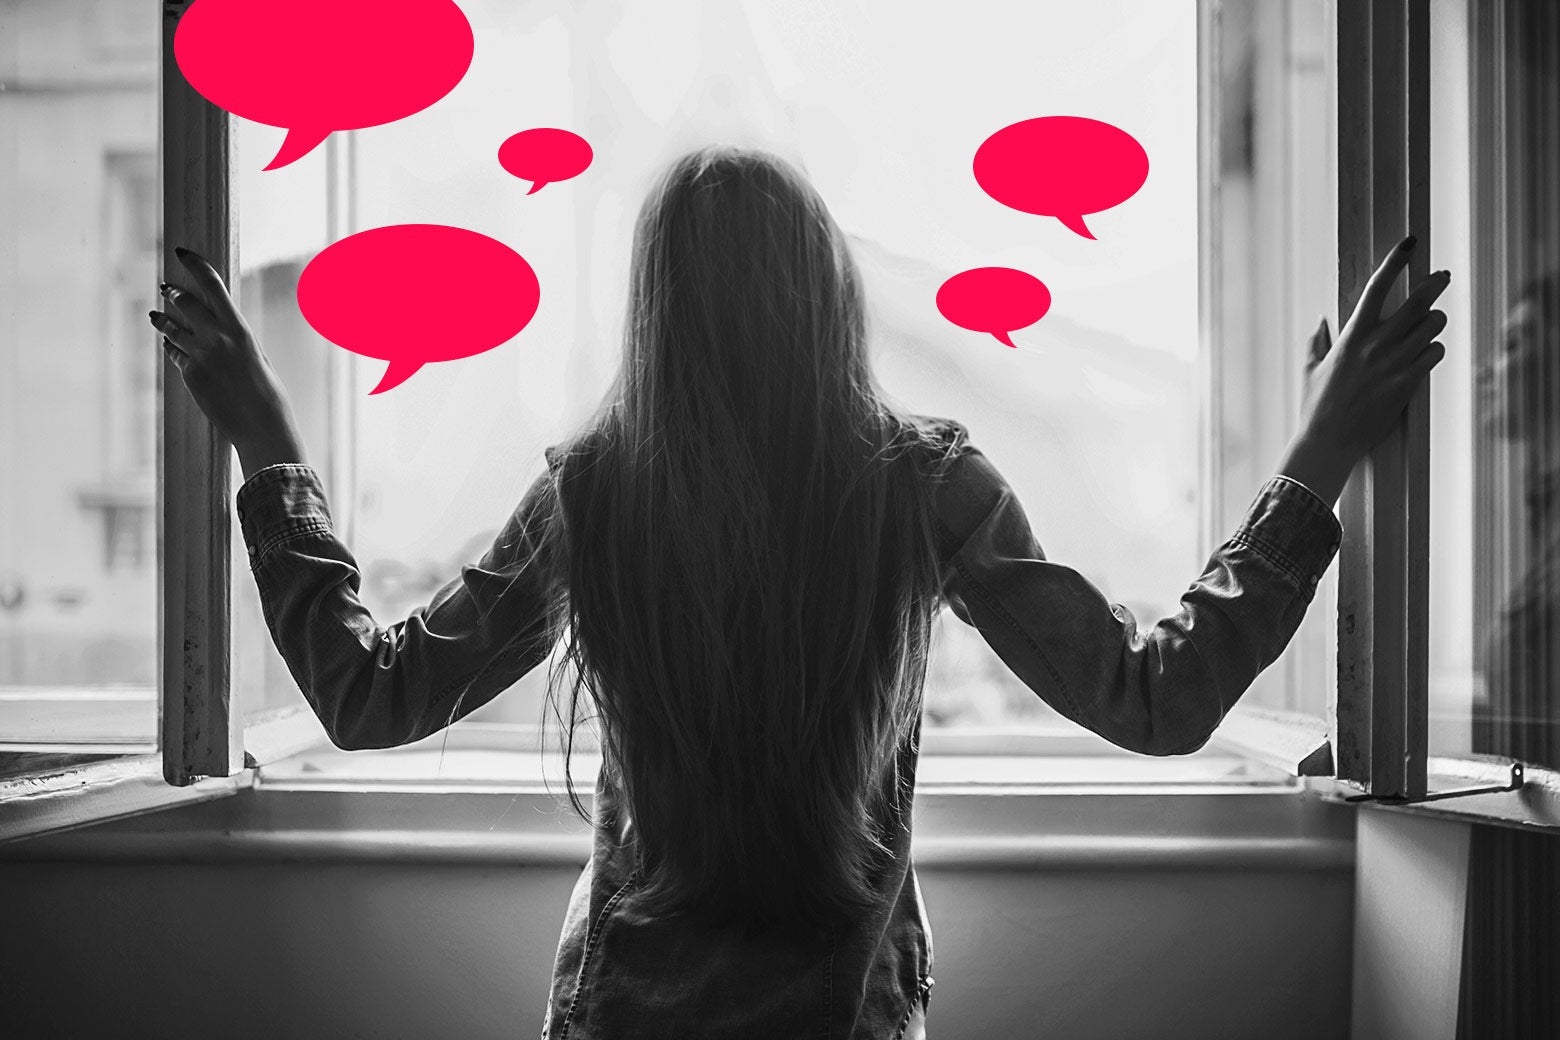 Woman with back to camera, looking out window, surrounded by speech bubbles